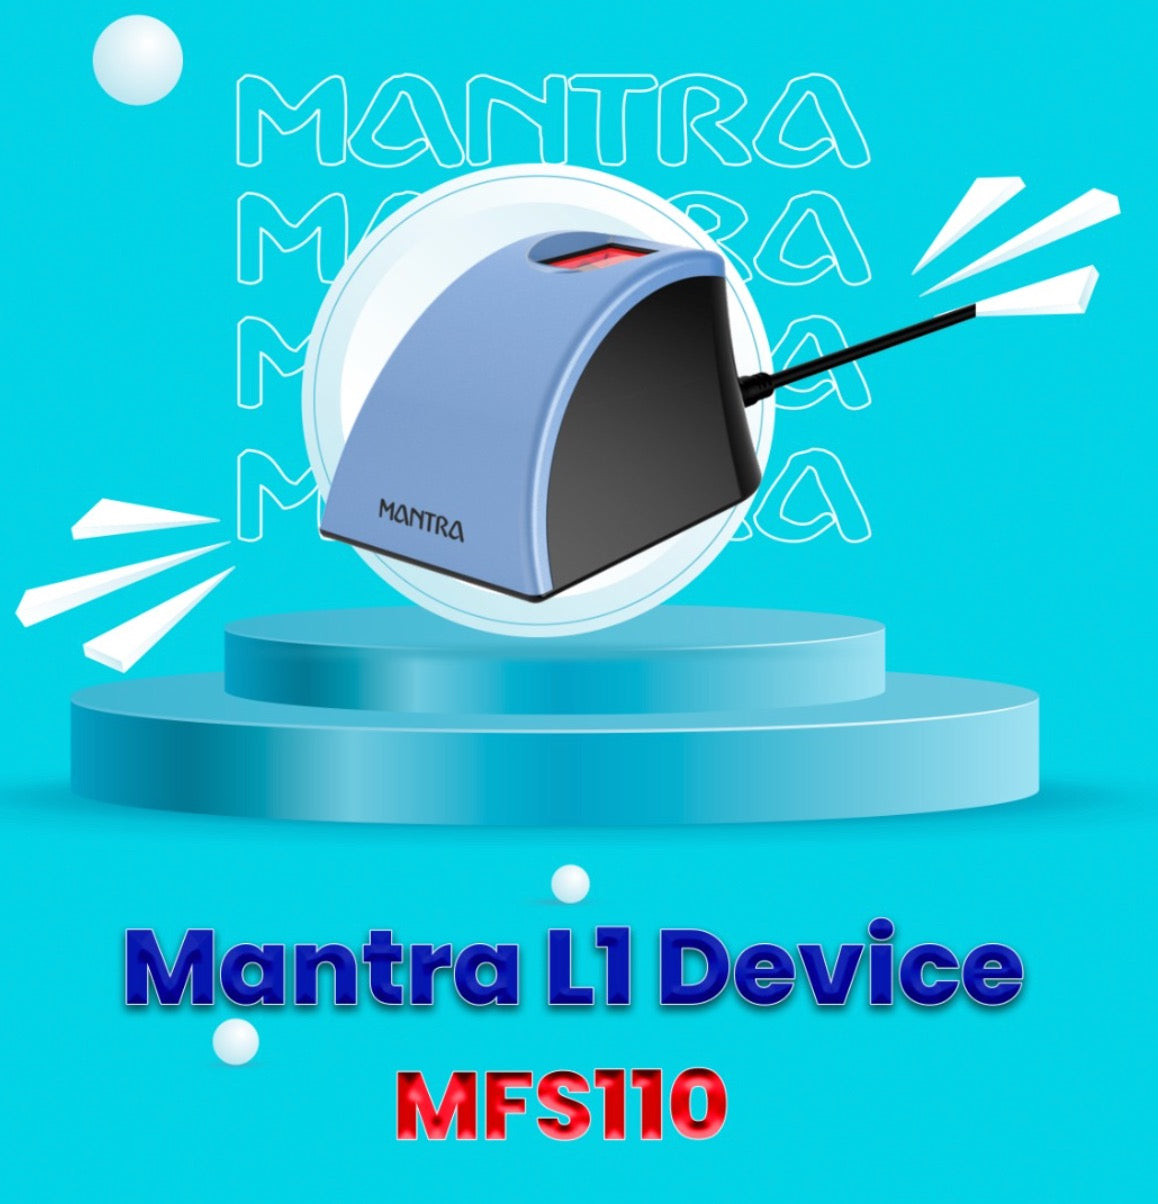 Mantra MFS 110 L1 Biometric Fingerprint Scanner | Aadhaar Authentication | Latest RD Service Update | High Security & Fast Scanning | Reliable & Durable